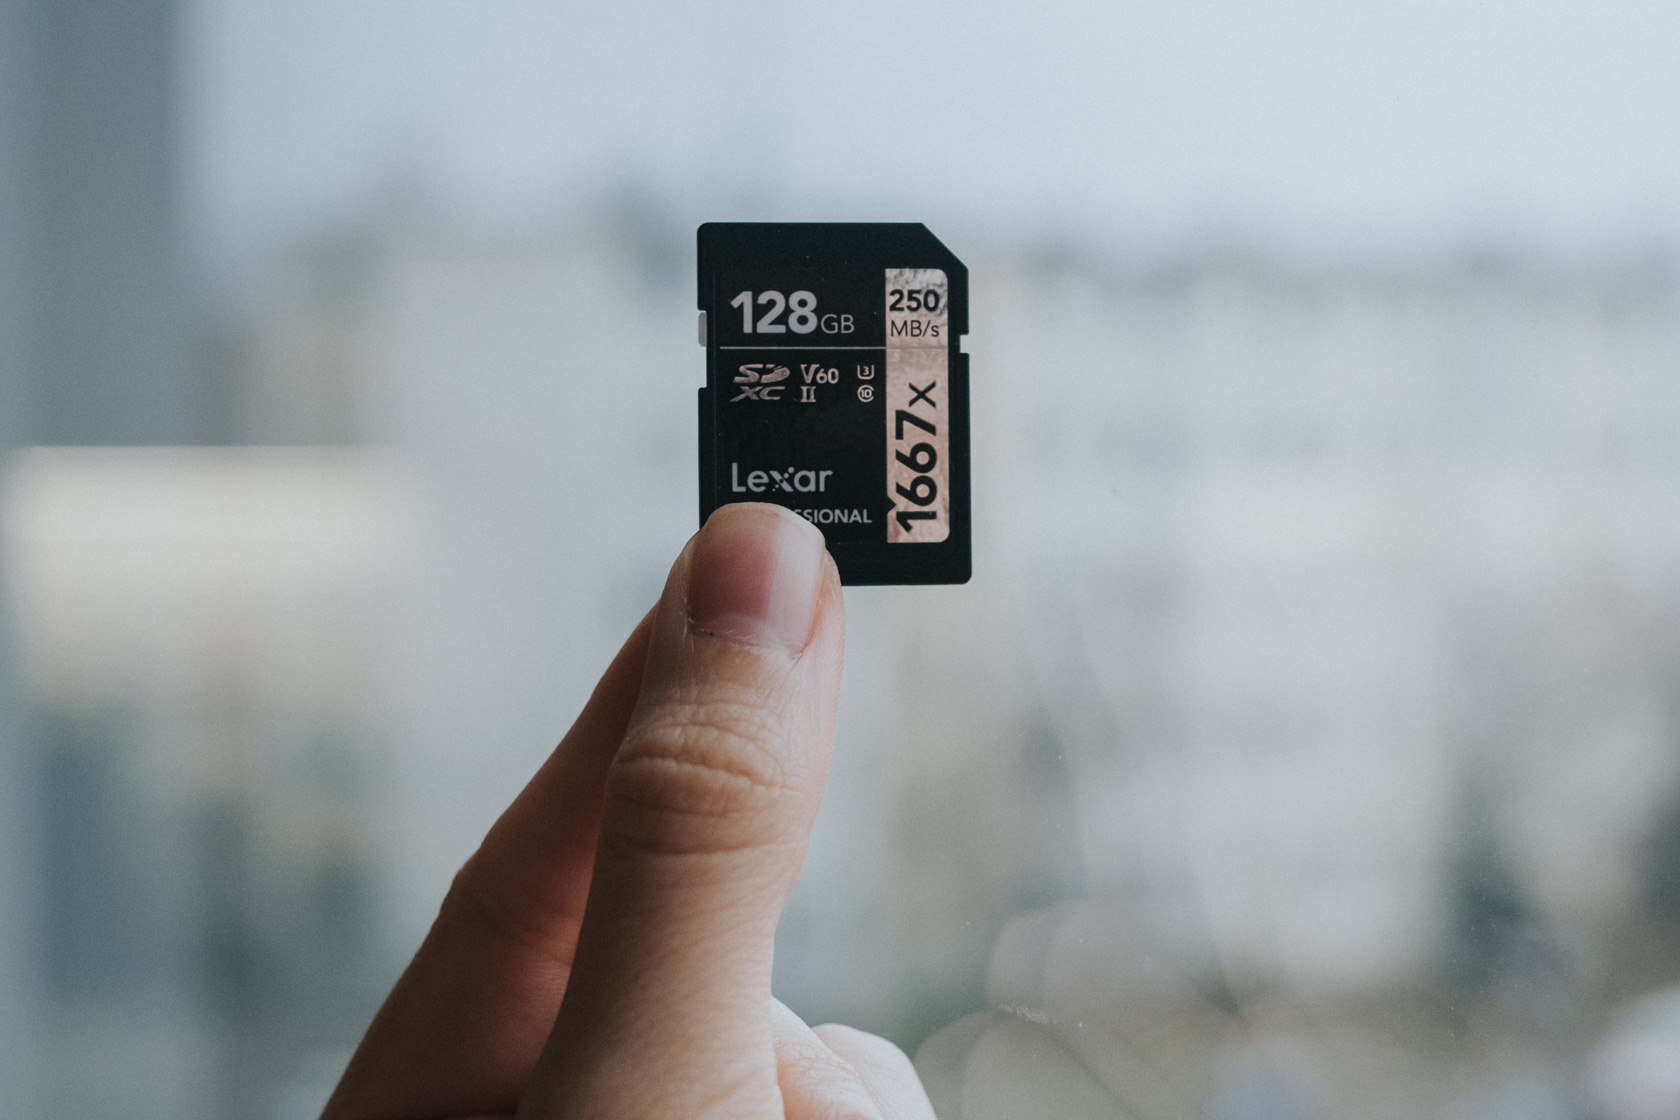 High performance memory cards